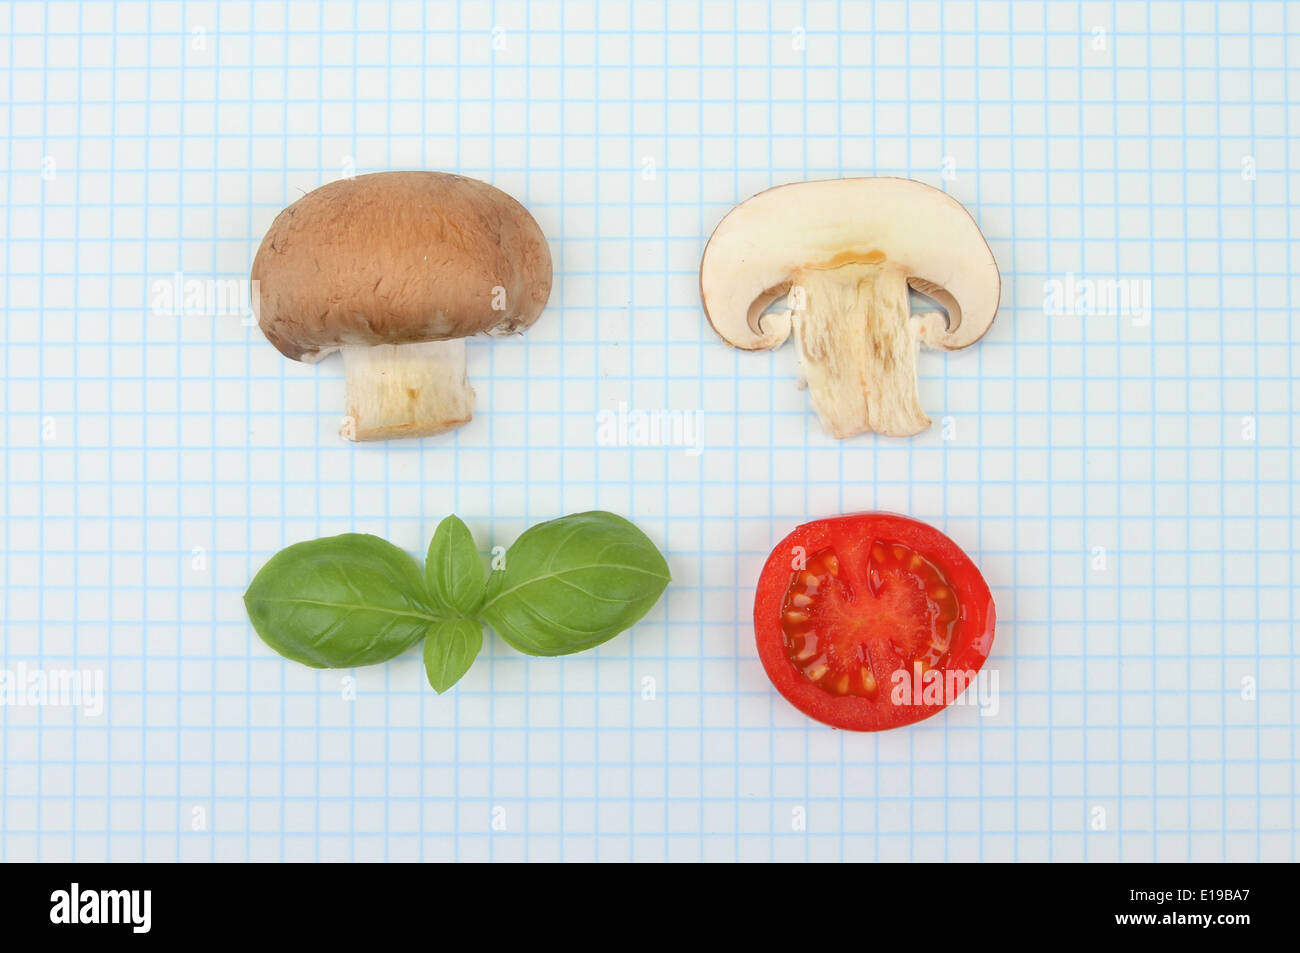 Food science concept, mushrooms, basil and tomato on graph paper Stock Photo